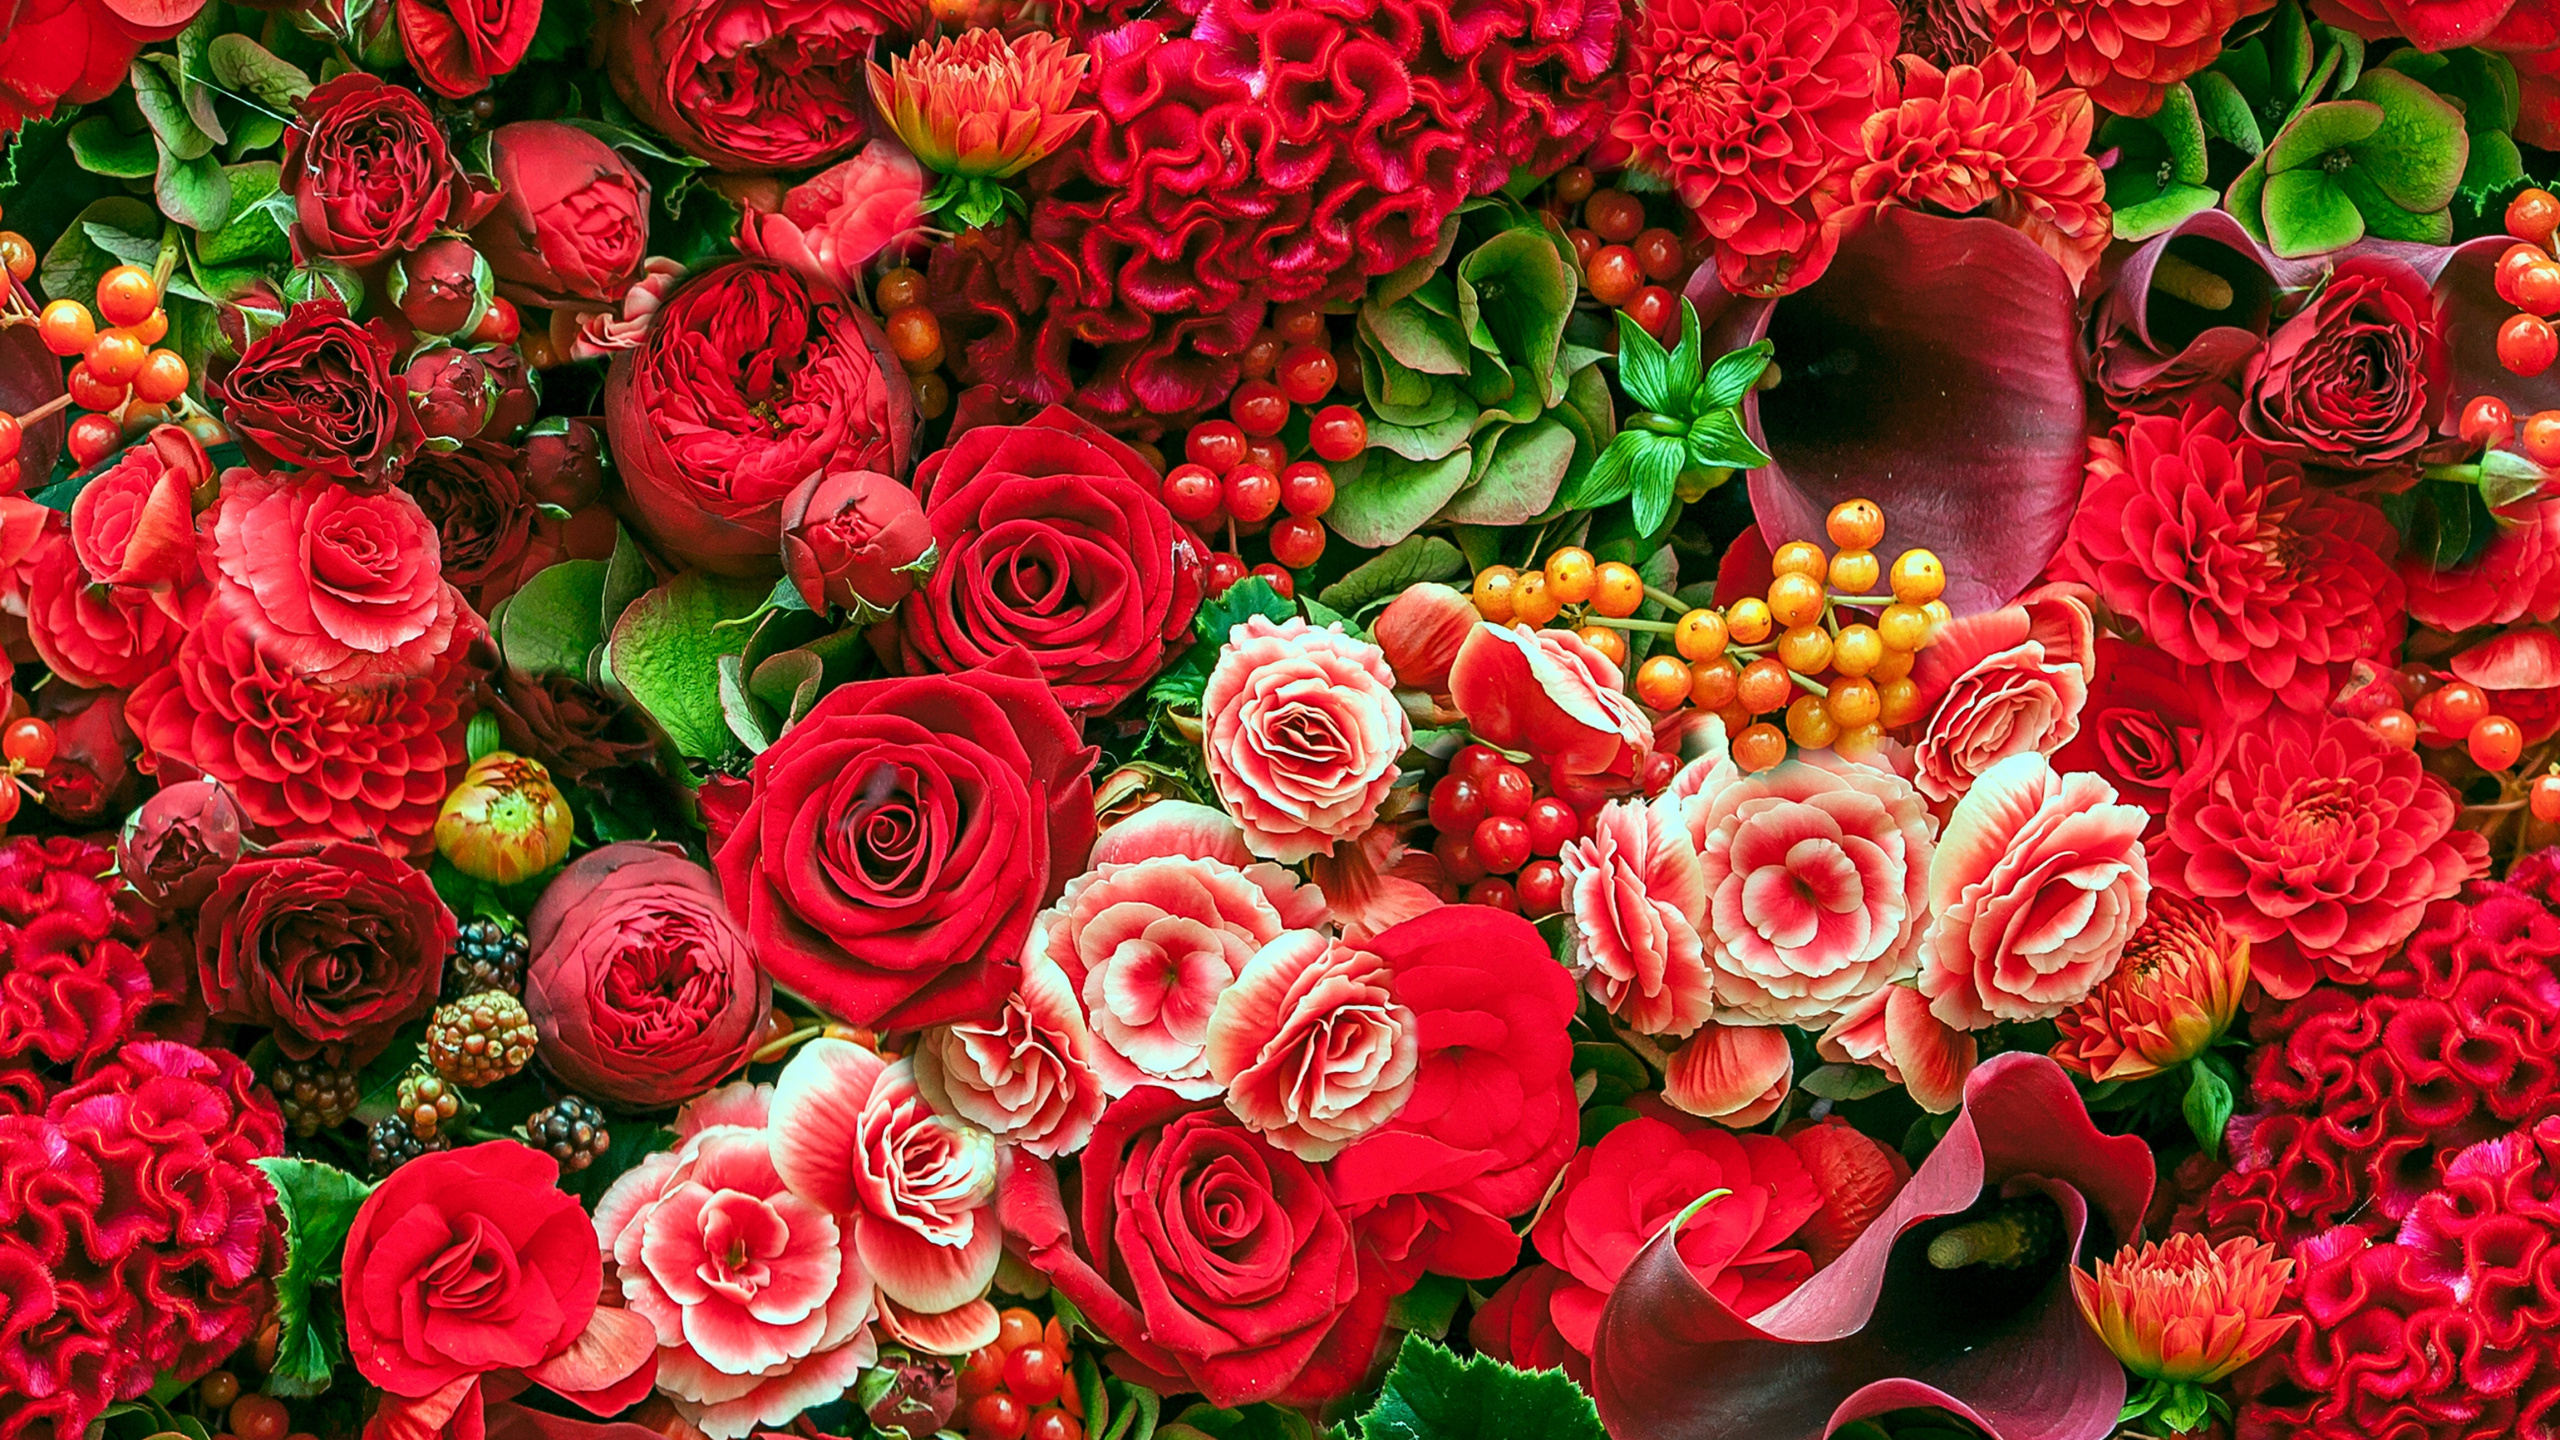 Red Roses With Green Leaves. Wallpaper in 2560x1440 Resolution